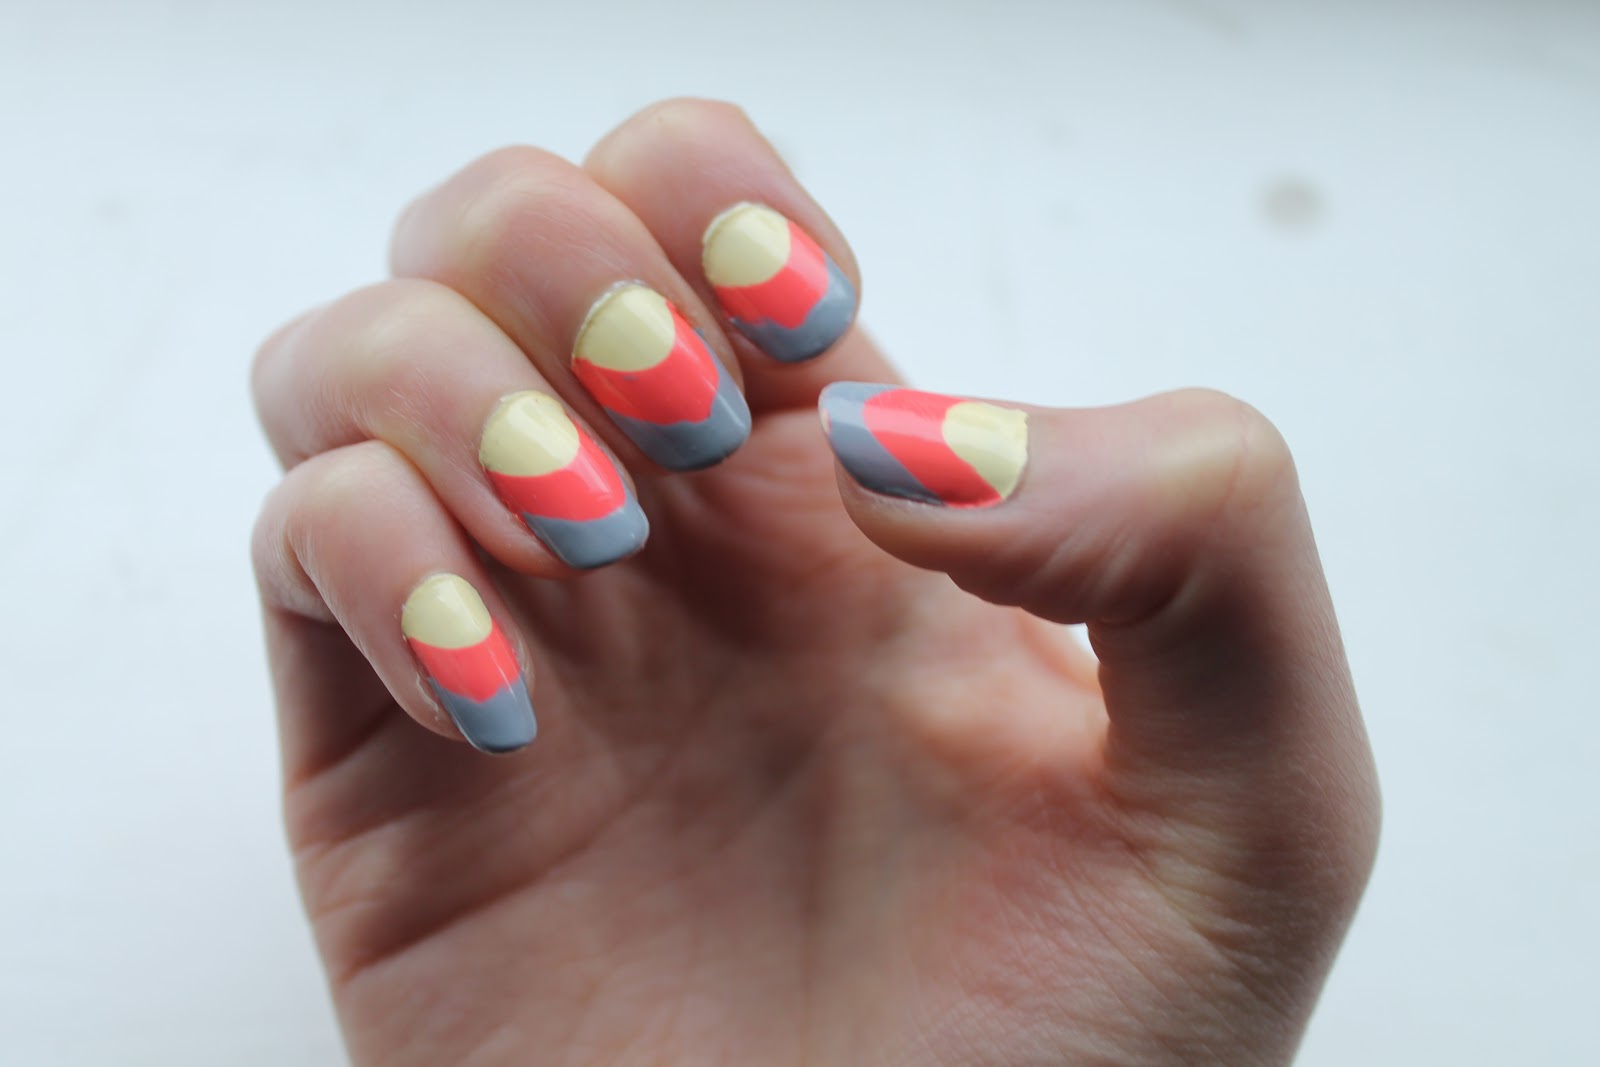 2. 80 Nail Designs for Short Nails - wide 8